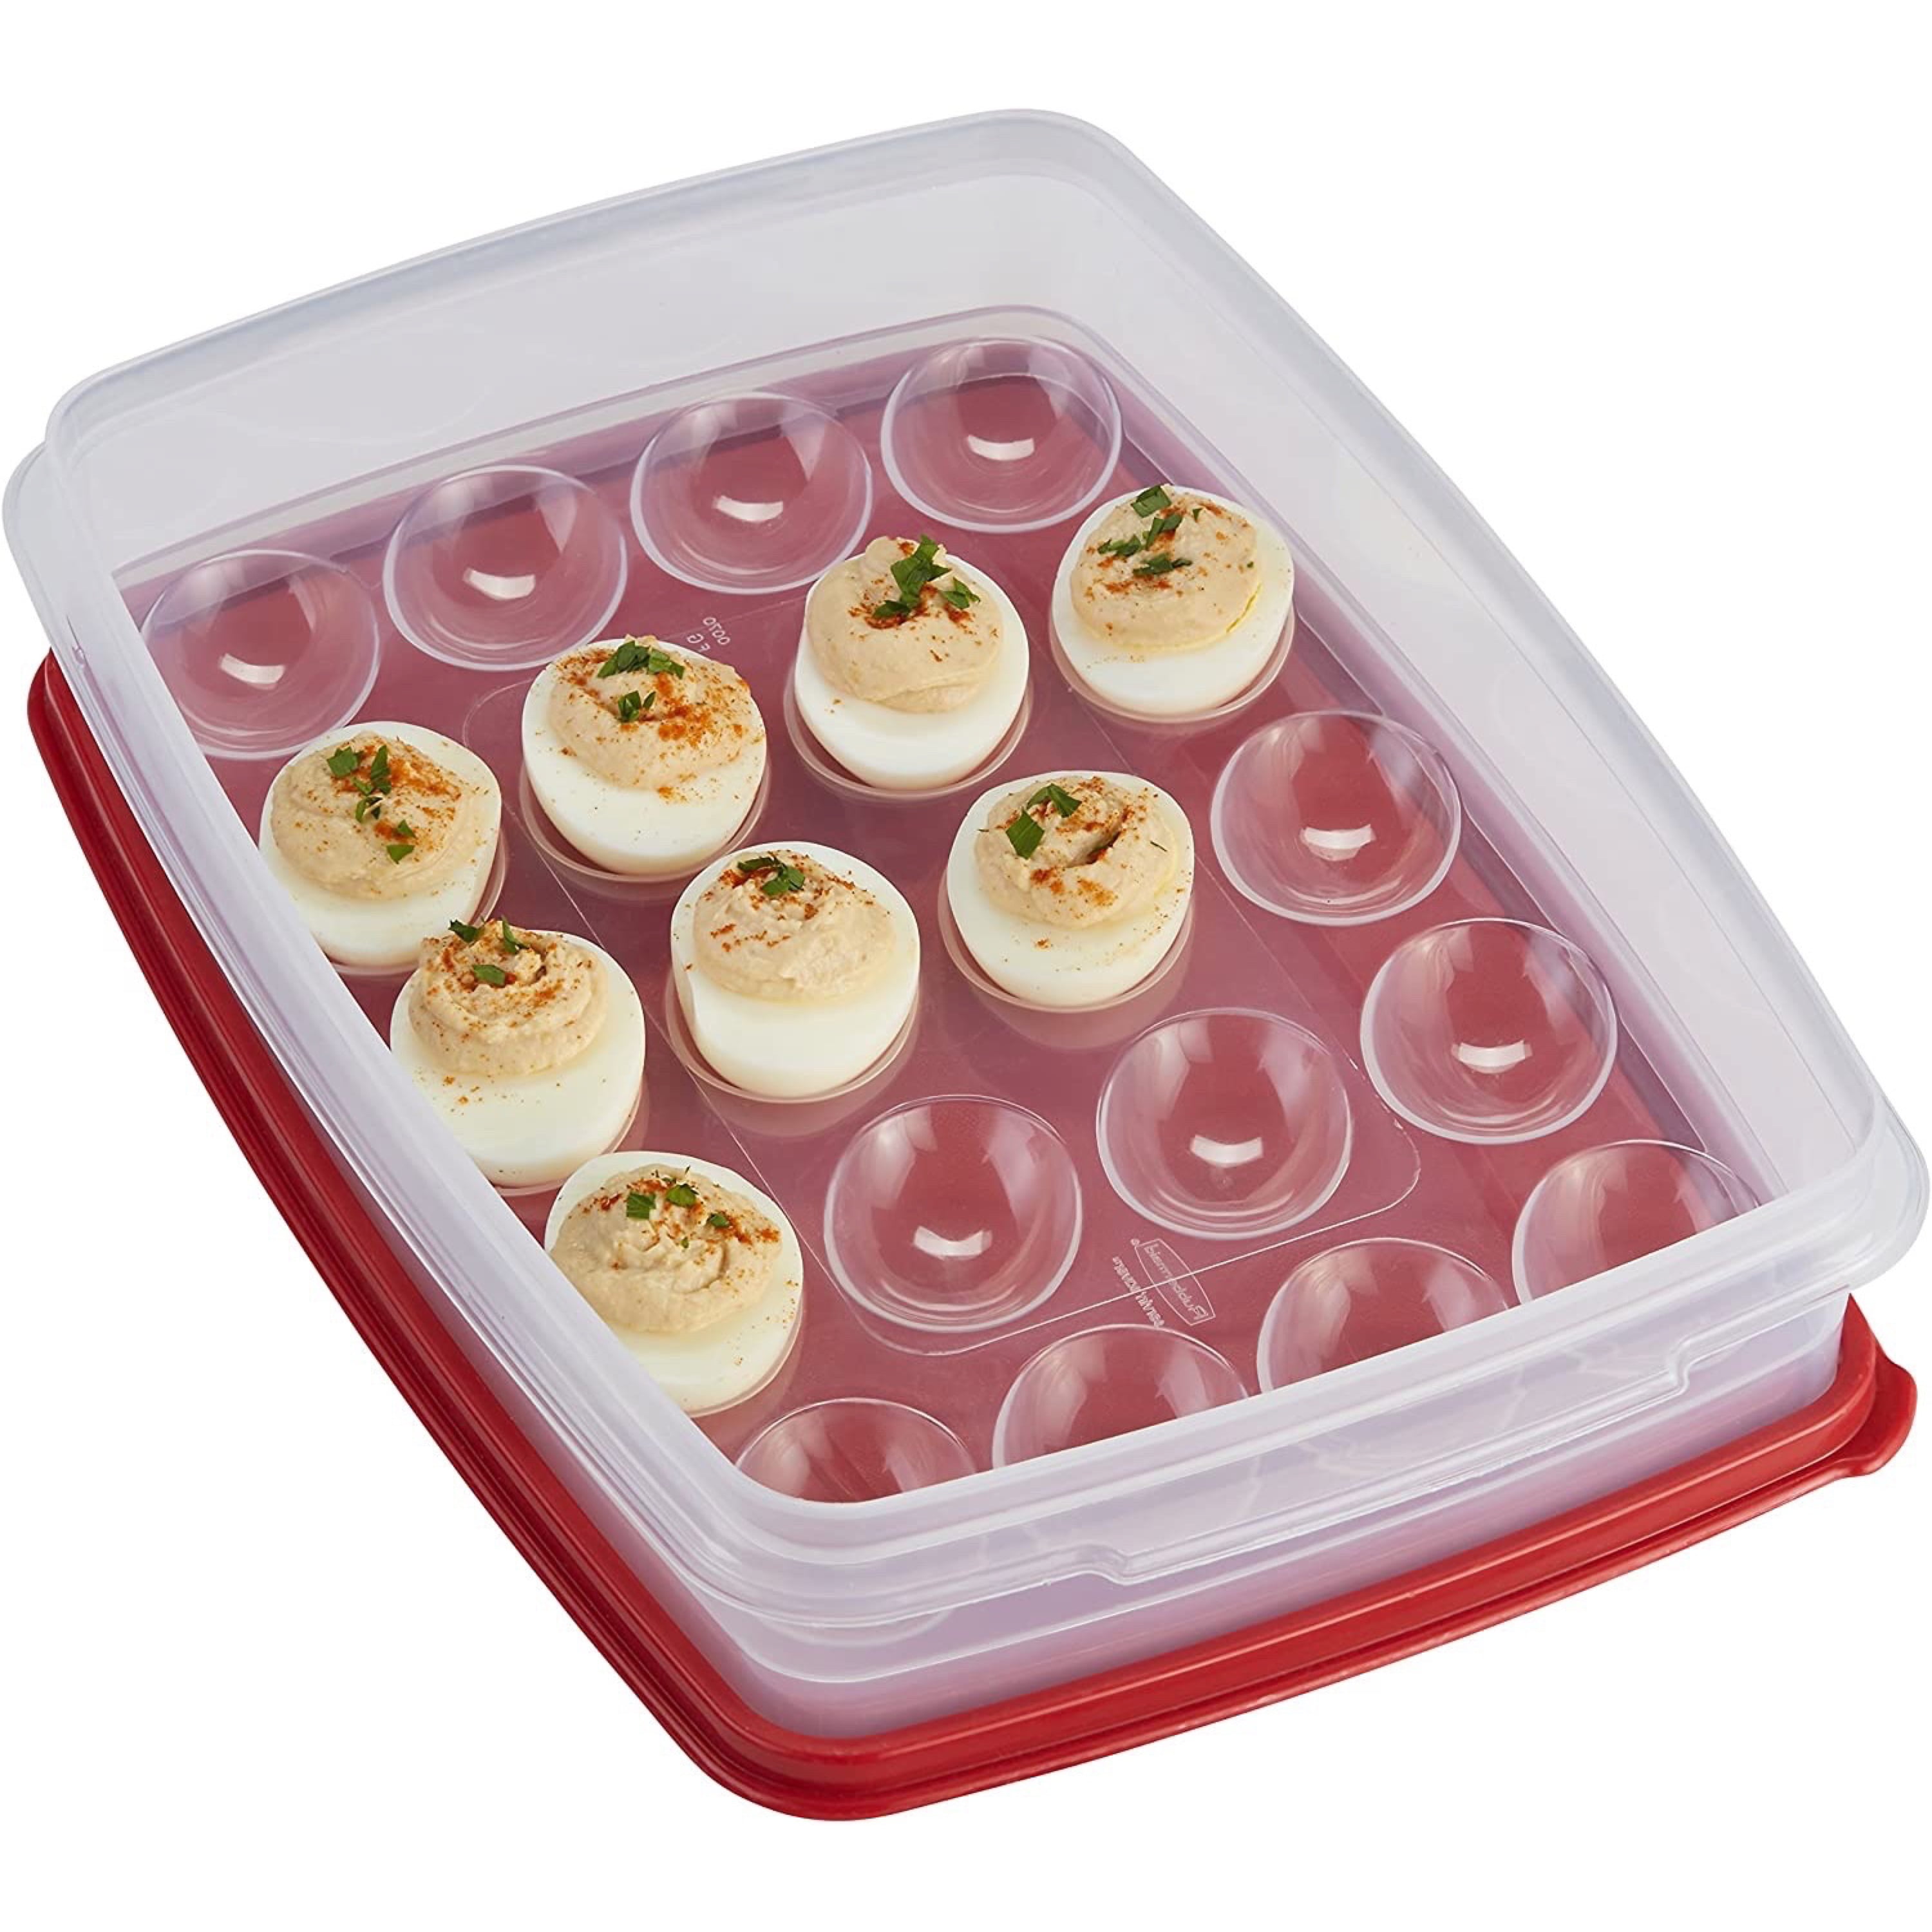 Rubbermaid 1832488 Deviled Egg Container for sale online